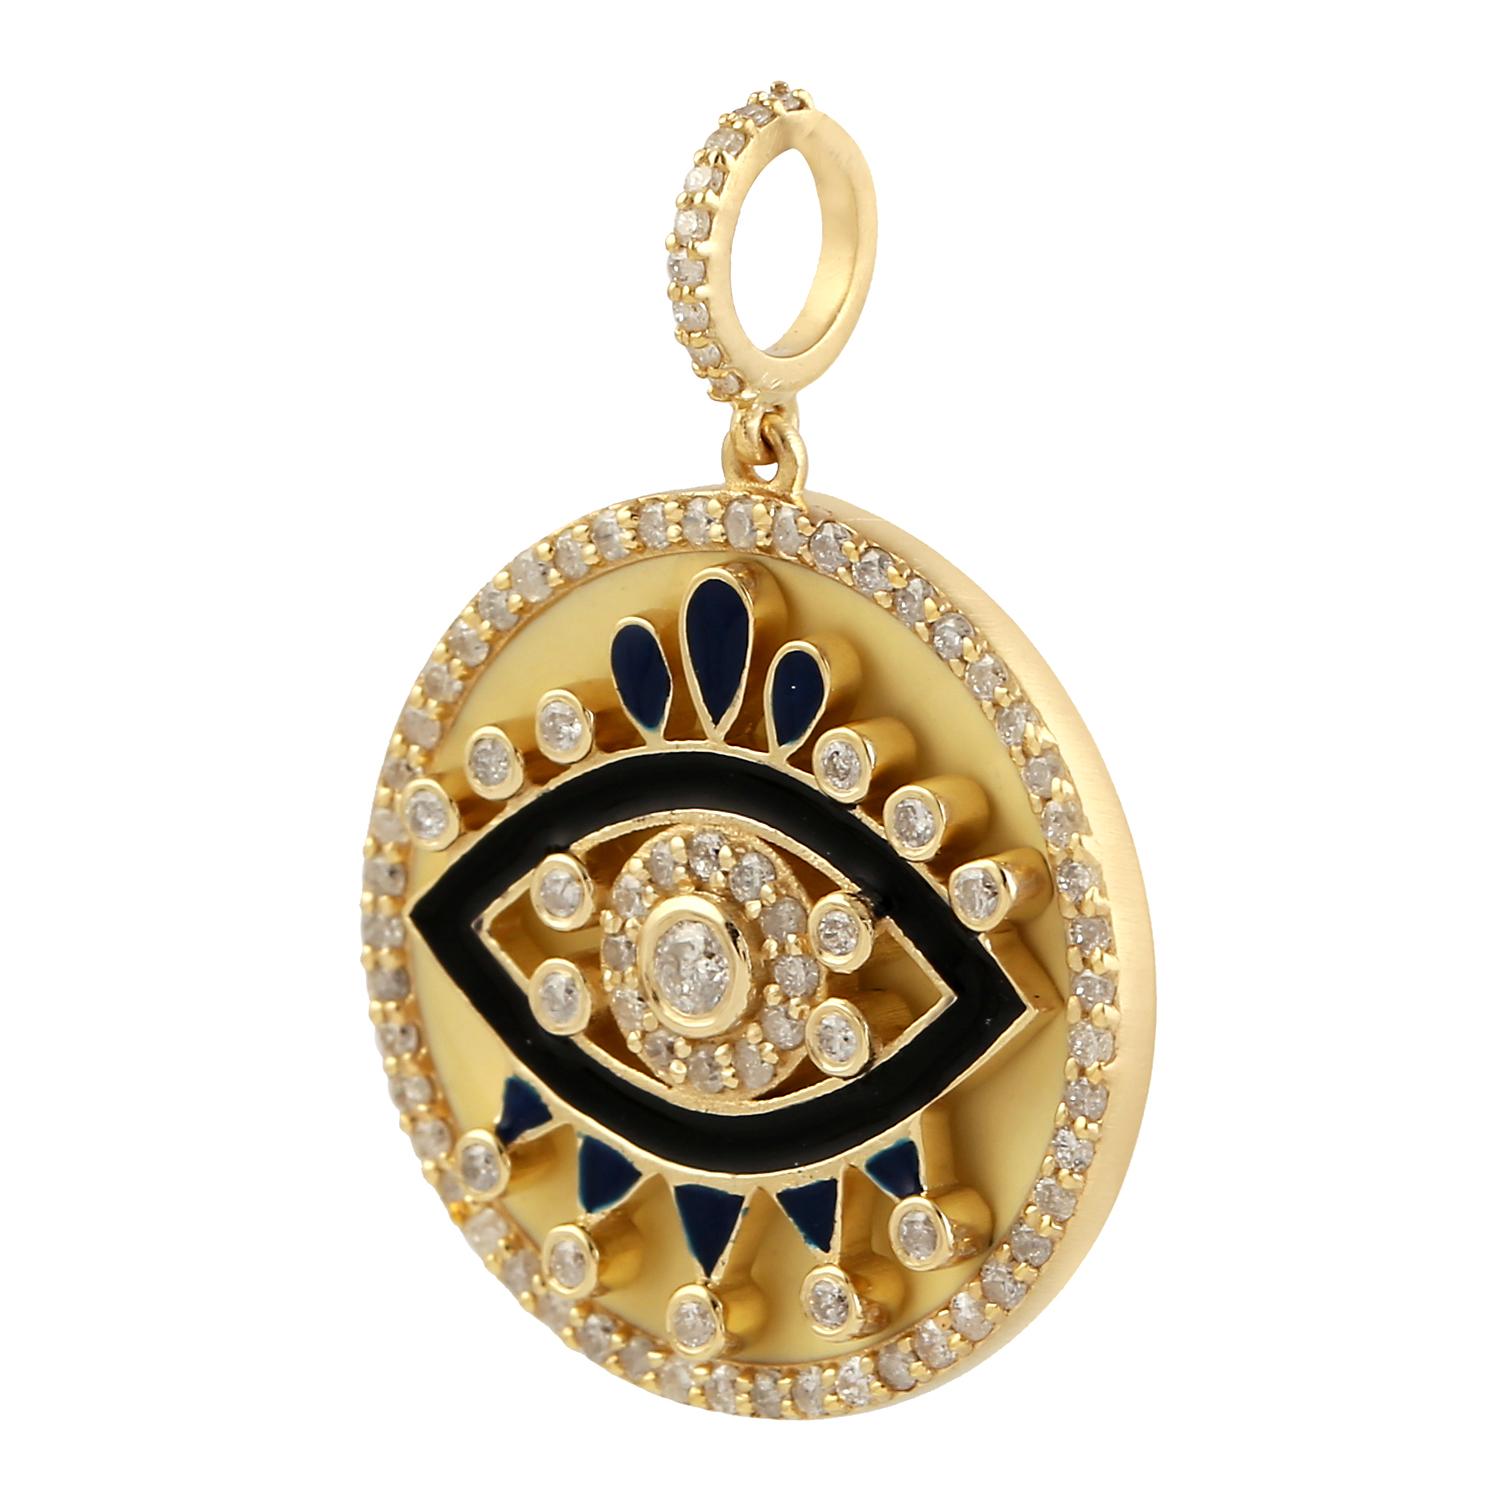 The 14 karat gold enamel pendant is hand set with .52 carats of sparkling diamonds. 

FOLLOW MEGHNA JEWELS storefront to view the latest collection & exclusive pieces. Meghna Jewels is proudly rated as a Top Seller on 1stdibs with 5 star customer